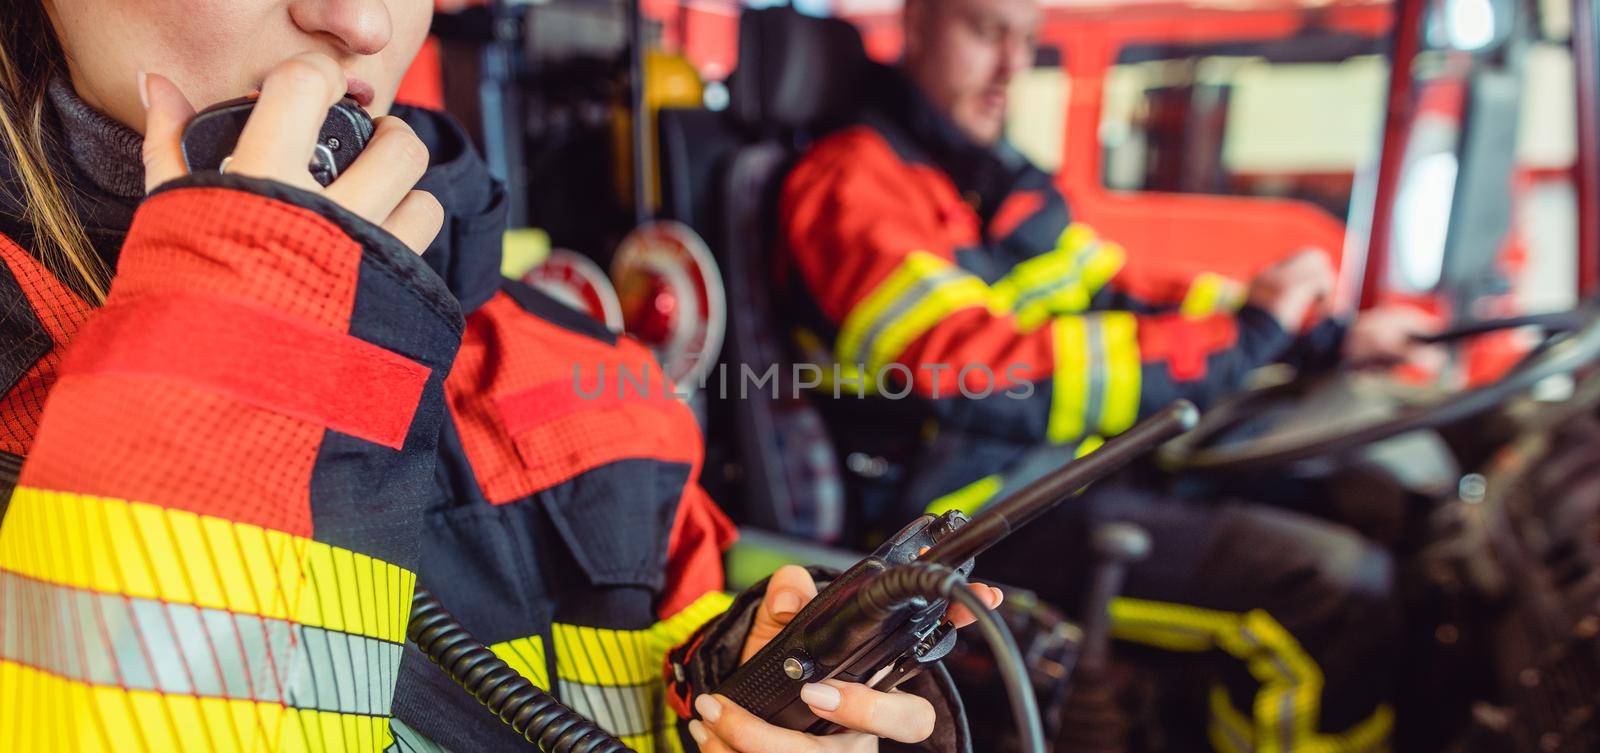 Fire fighter woman on duty using the radio by Kzenon